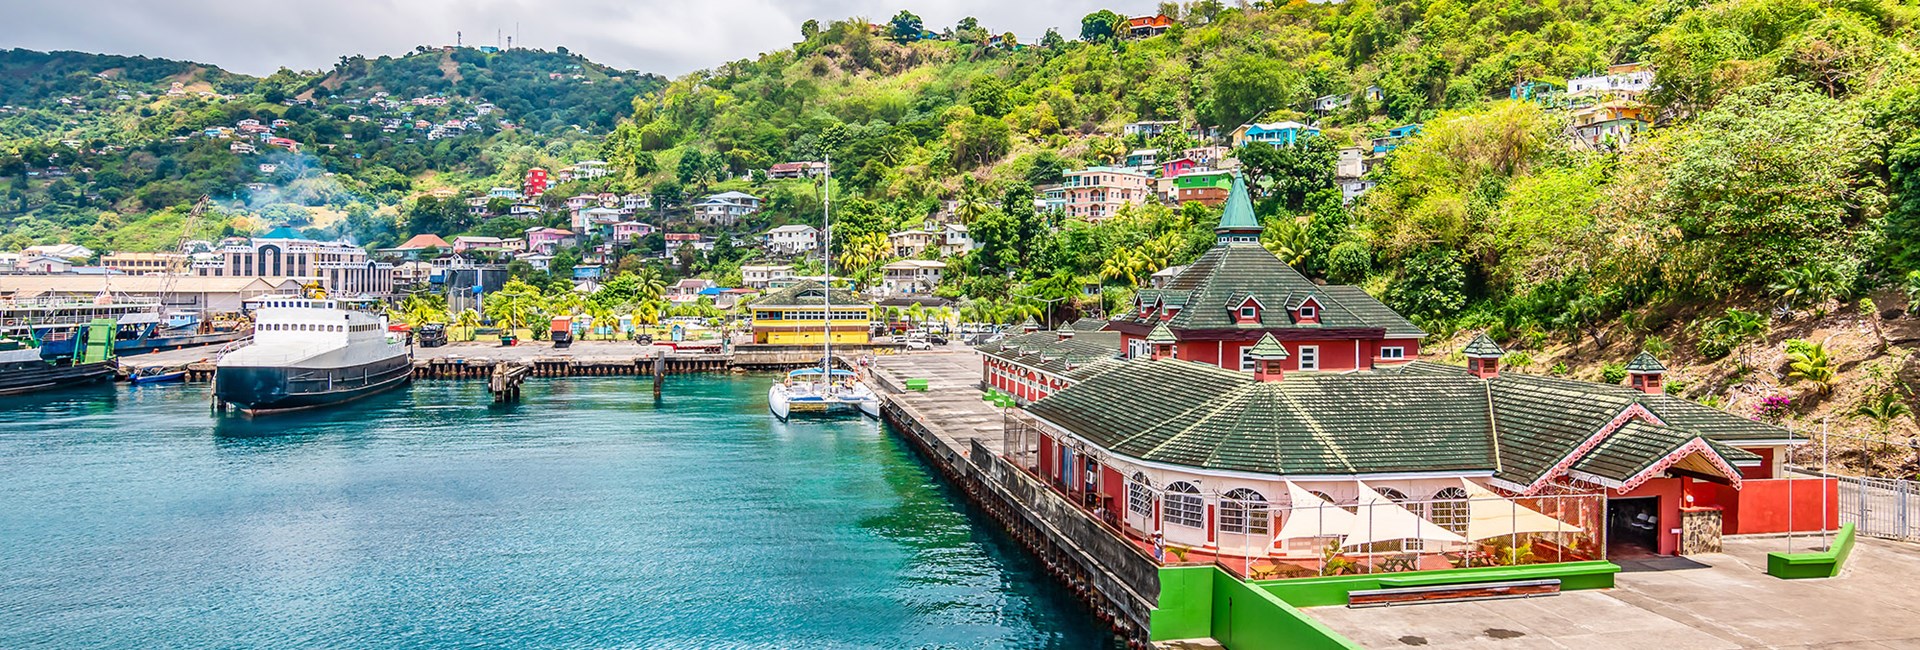 Colourful buildings by the sea in port of Kingstown